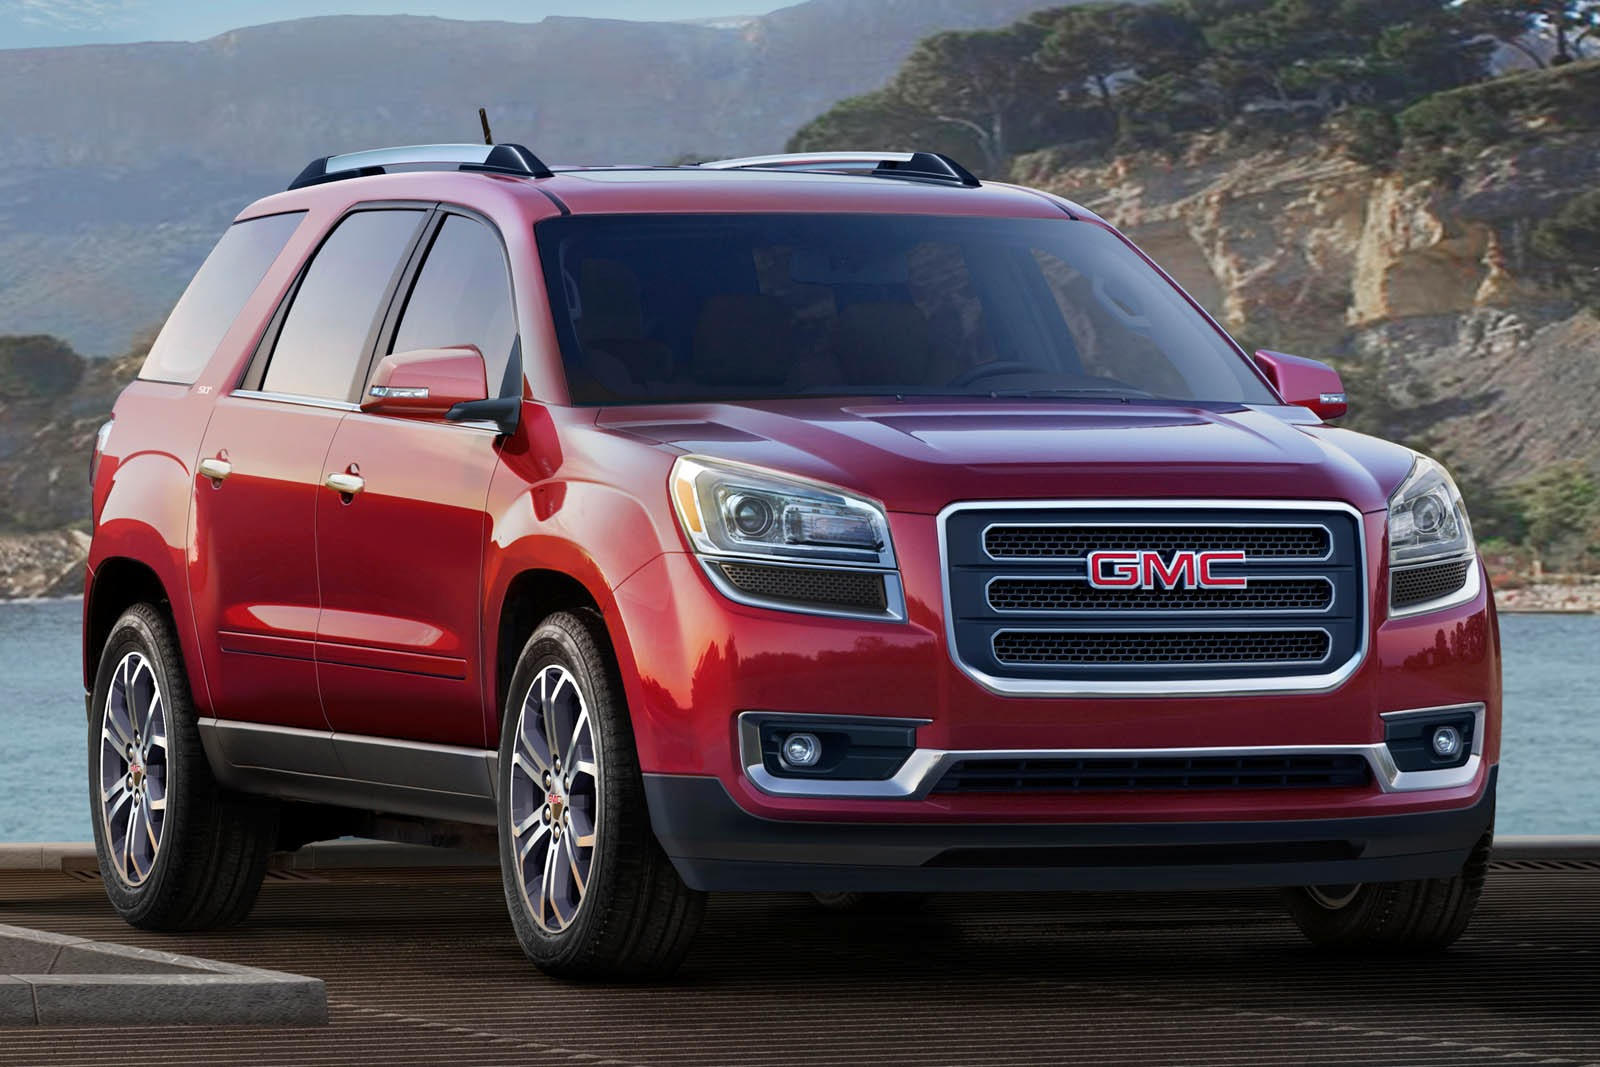 2017 Gmc Acadia Limited Review Trims Specs Price New Interior